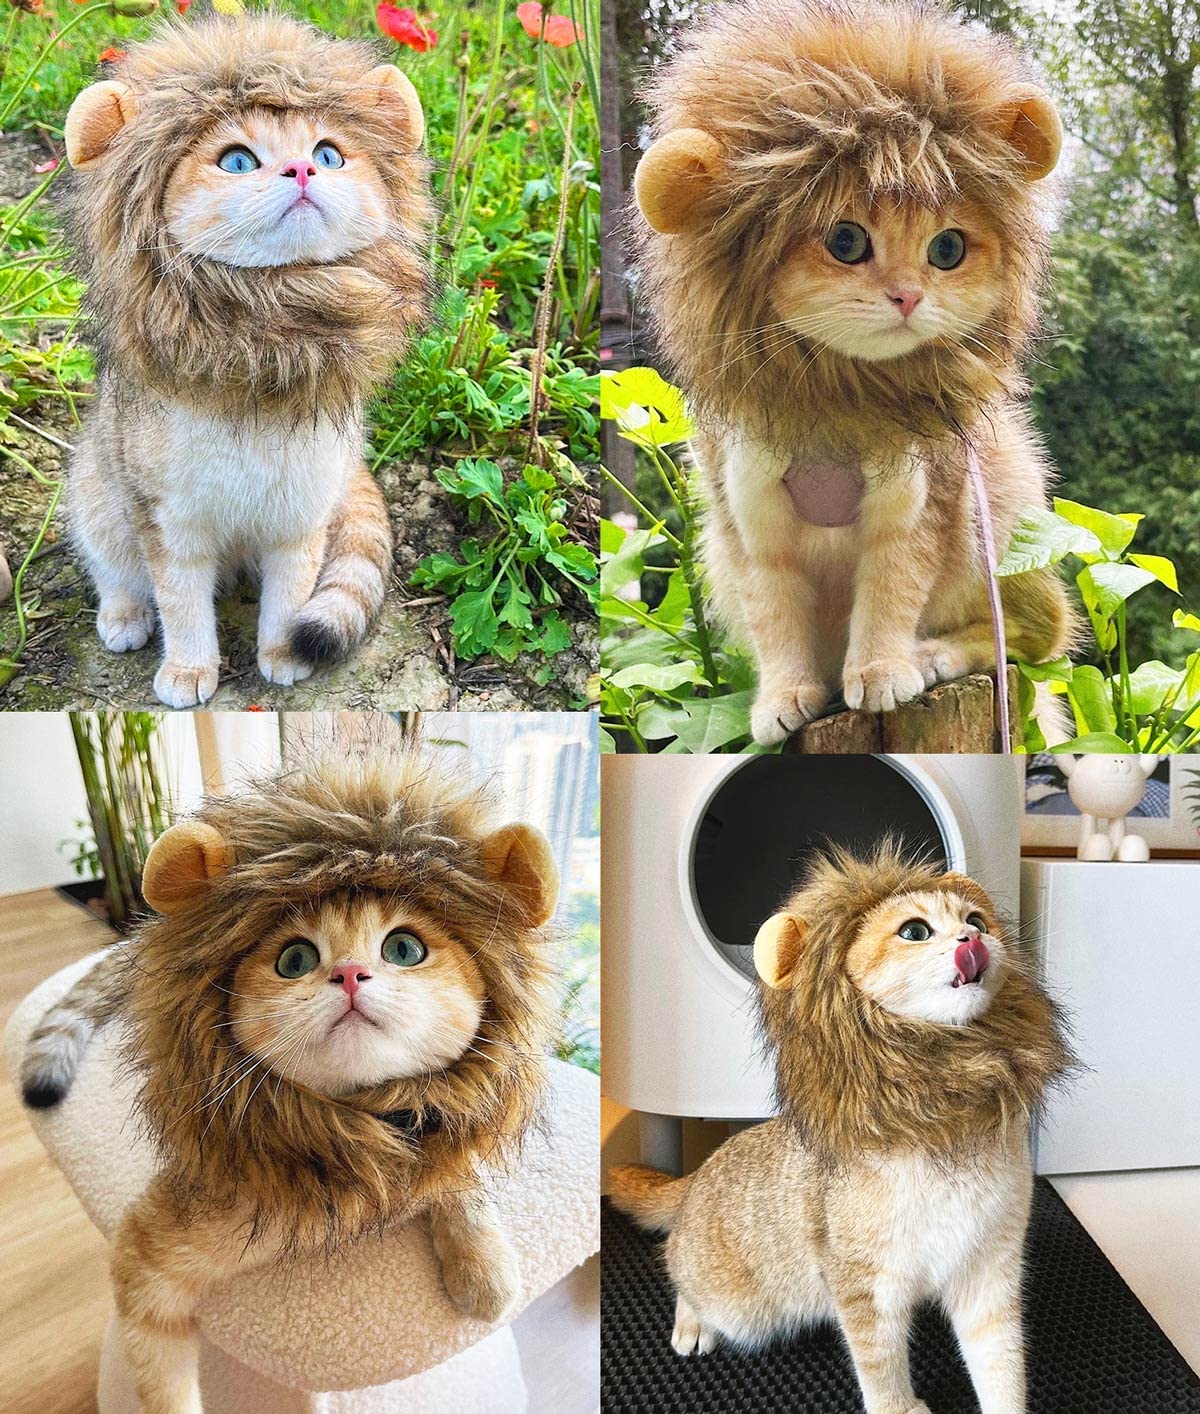 Lion Mane Wig for Dog and Cat Costume